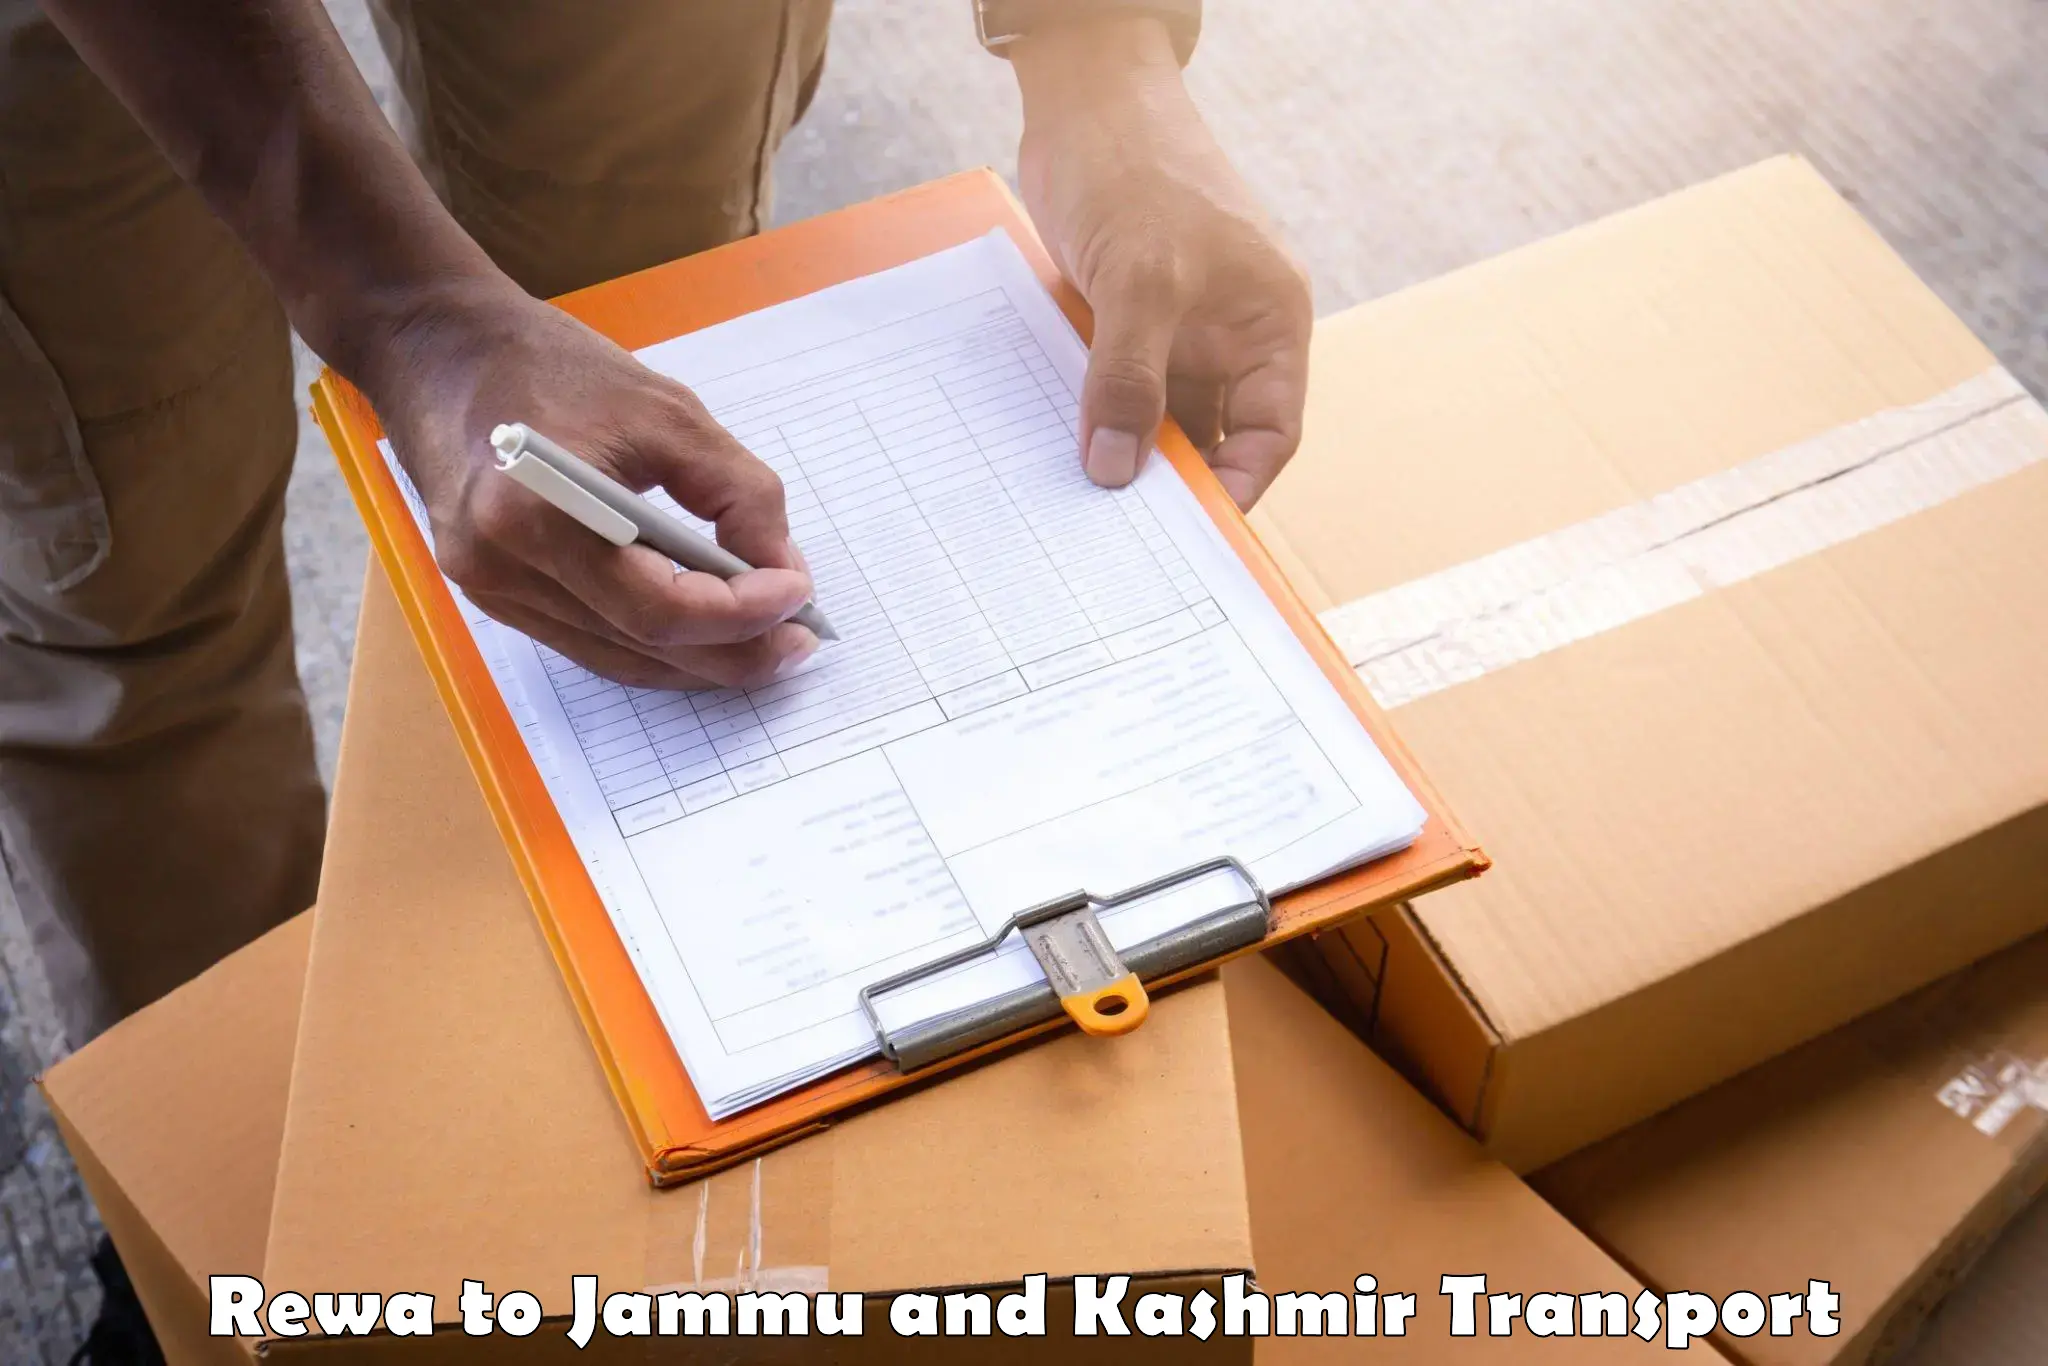 Commercial transport service Rewa to Jammu and Kashmir